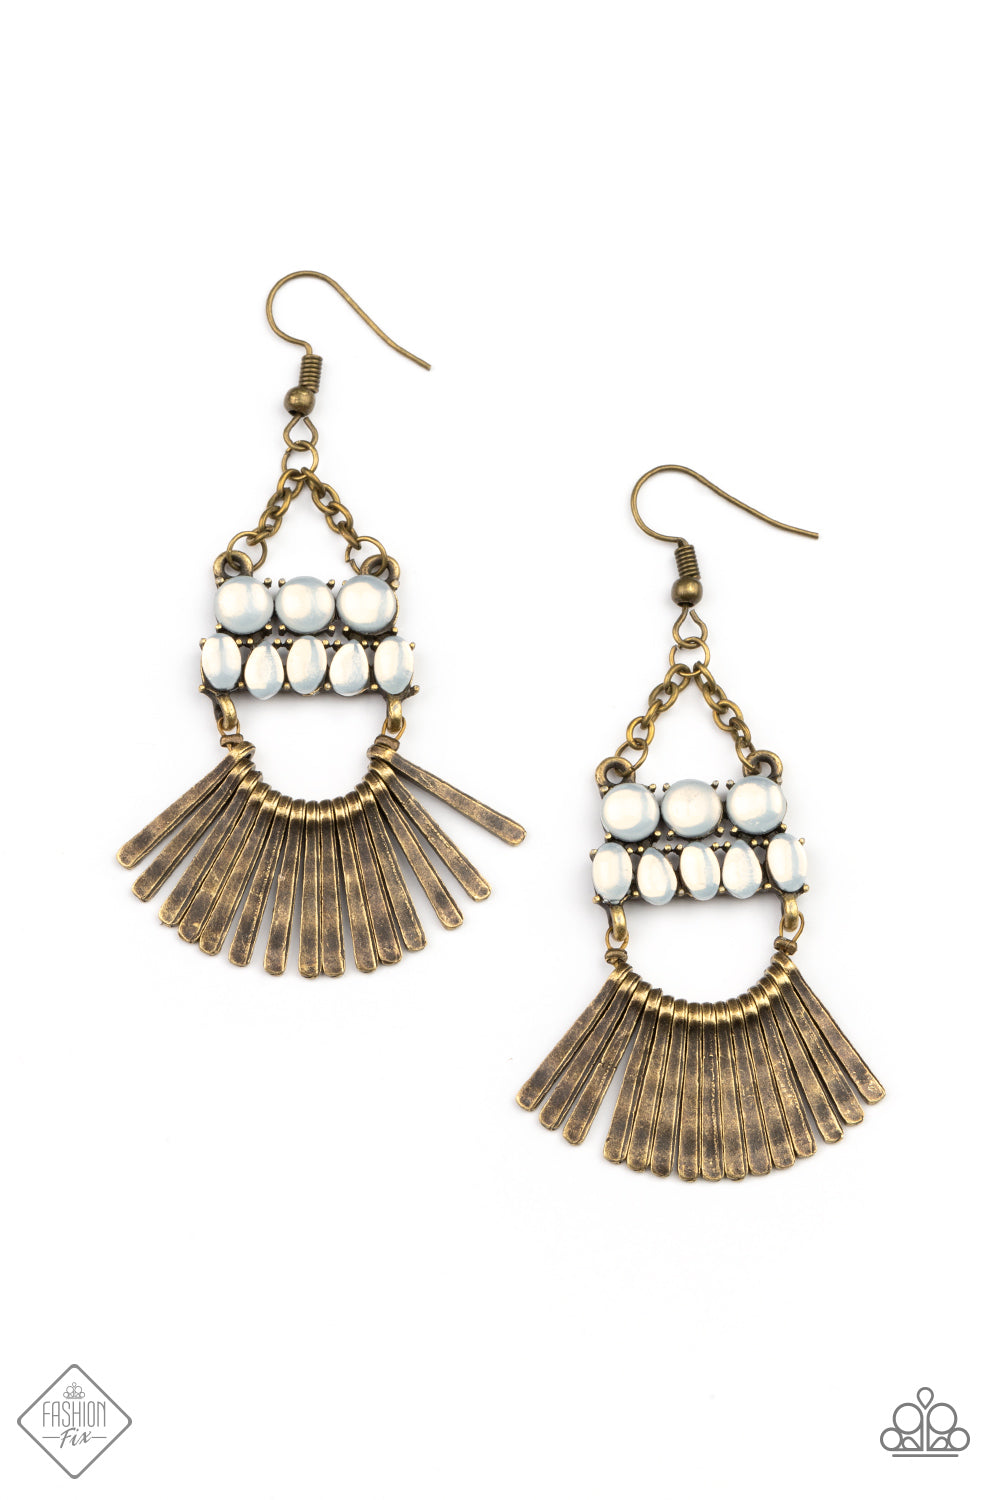 A FLARE For Fierceness - Brass Earrings May 2021 Fashion Fix Exclusive - Princess Glam Shop